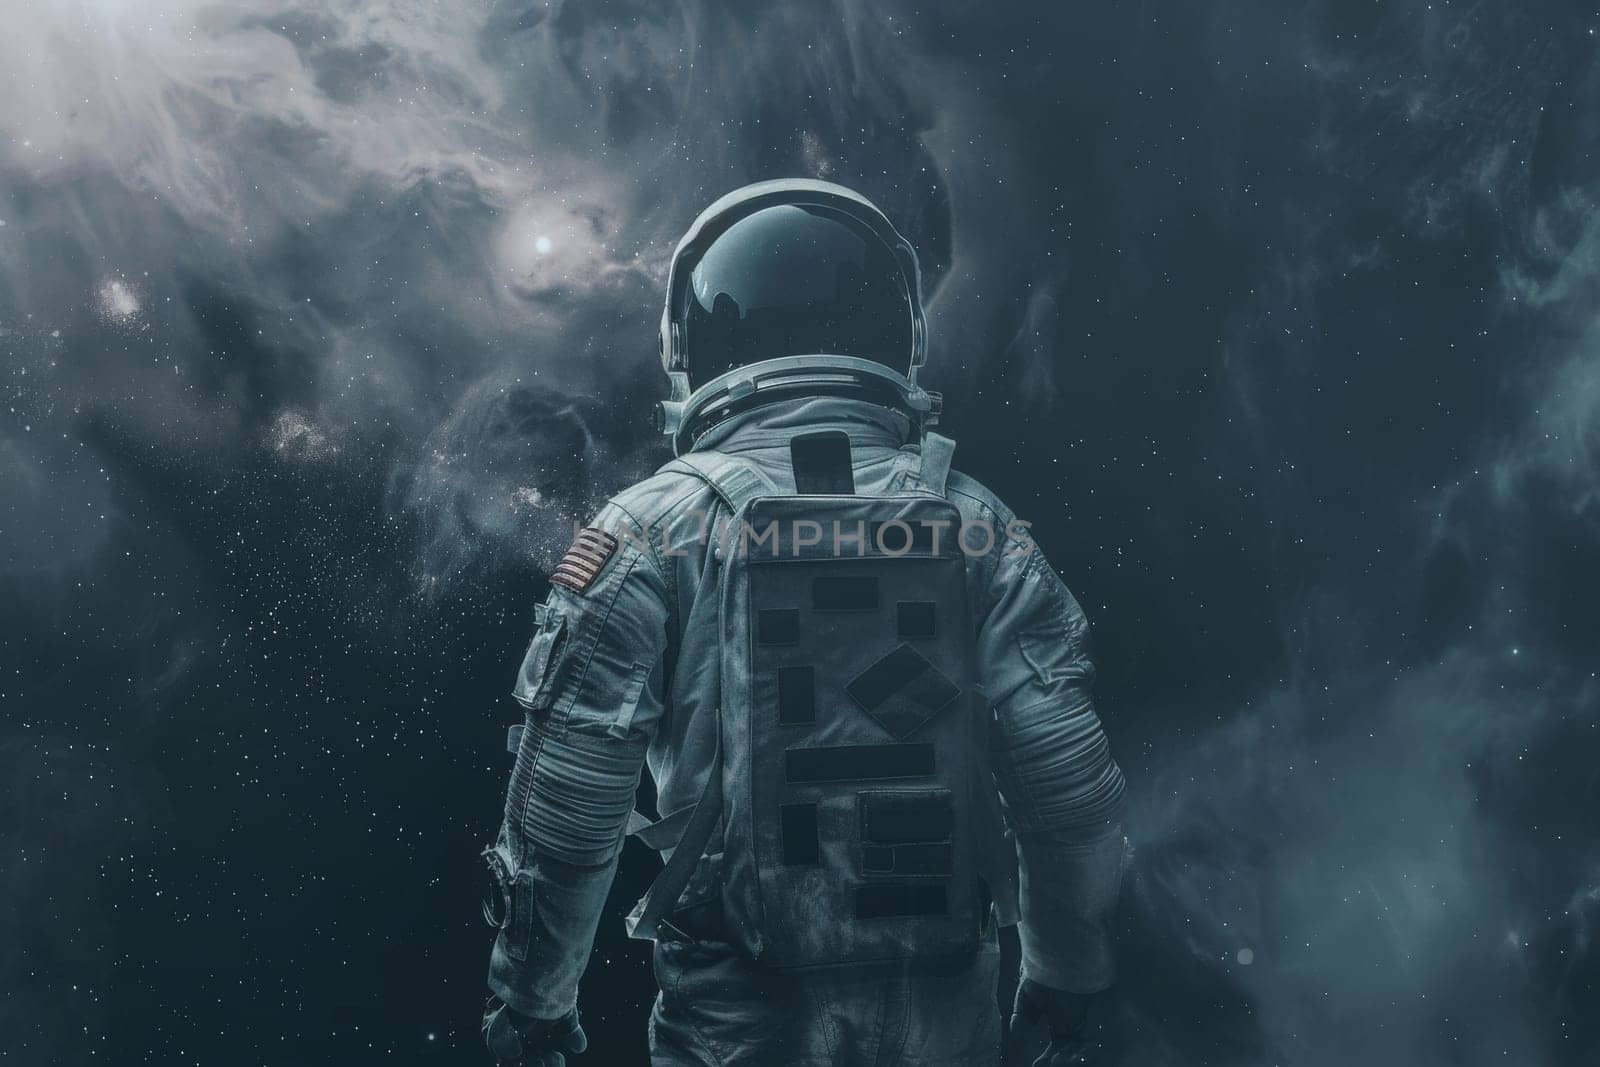 A man in a space suit is standing in front of a star. The image has a mood of exploration and adventure